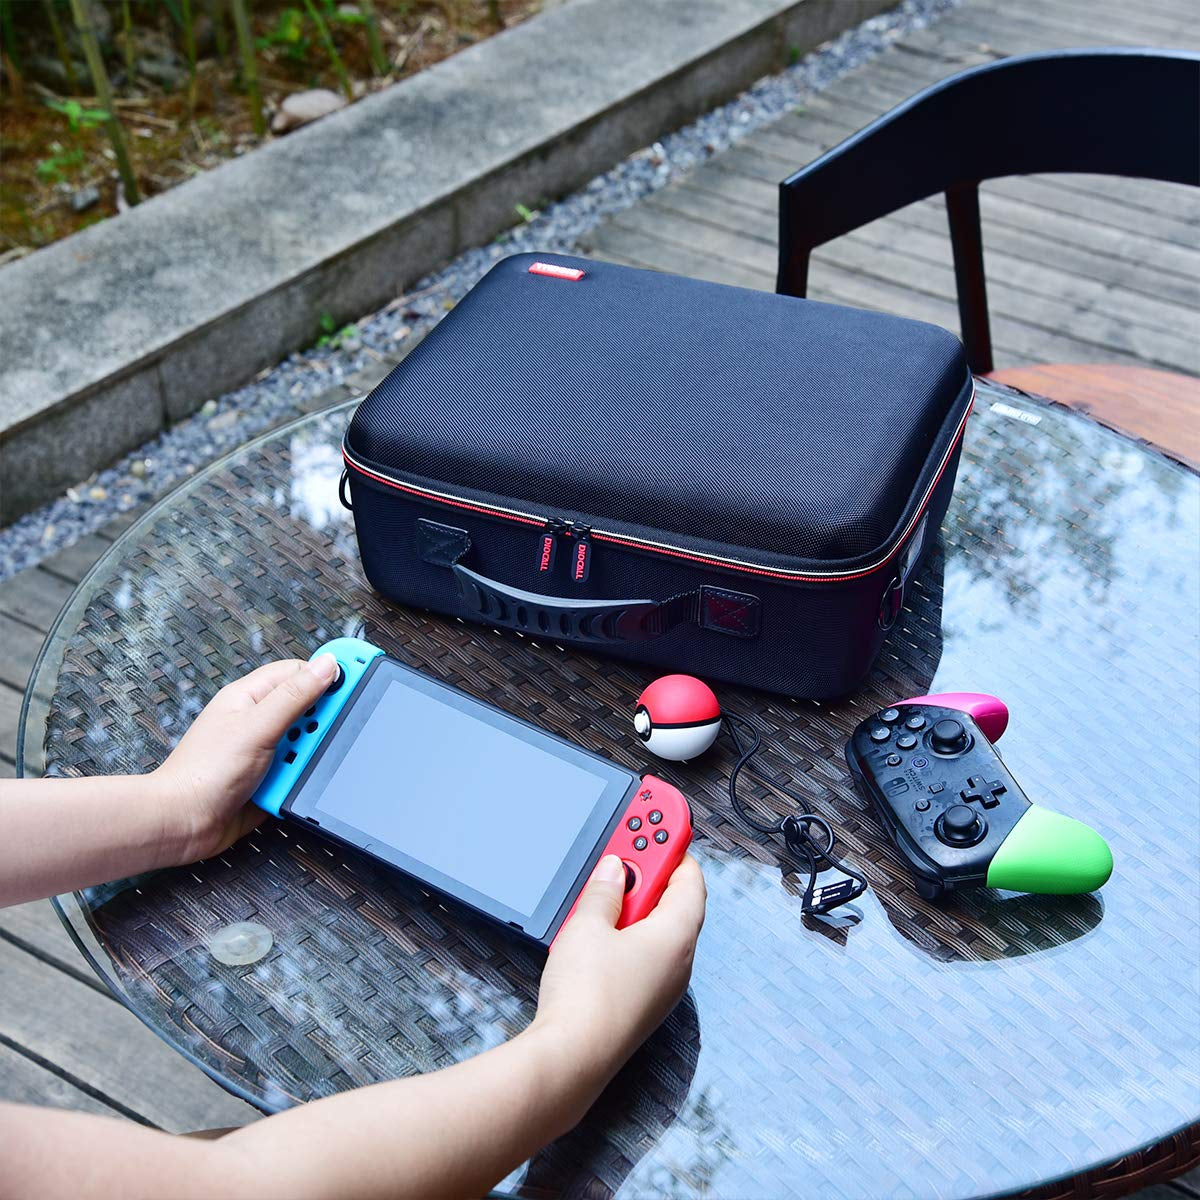 Deluxe Carrying Case Compatible with Nintendo Switch and Switch OLED 2021, Travel Bag Fit Switch Pro Controller